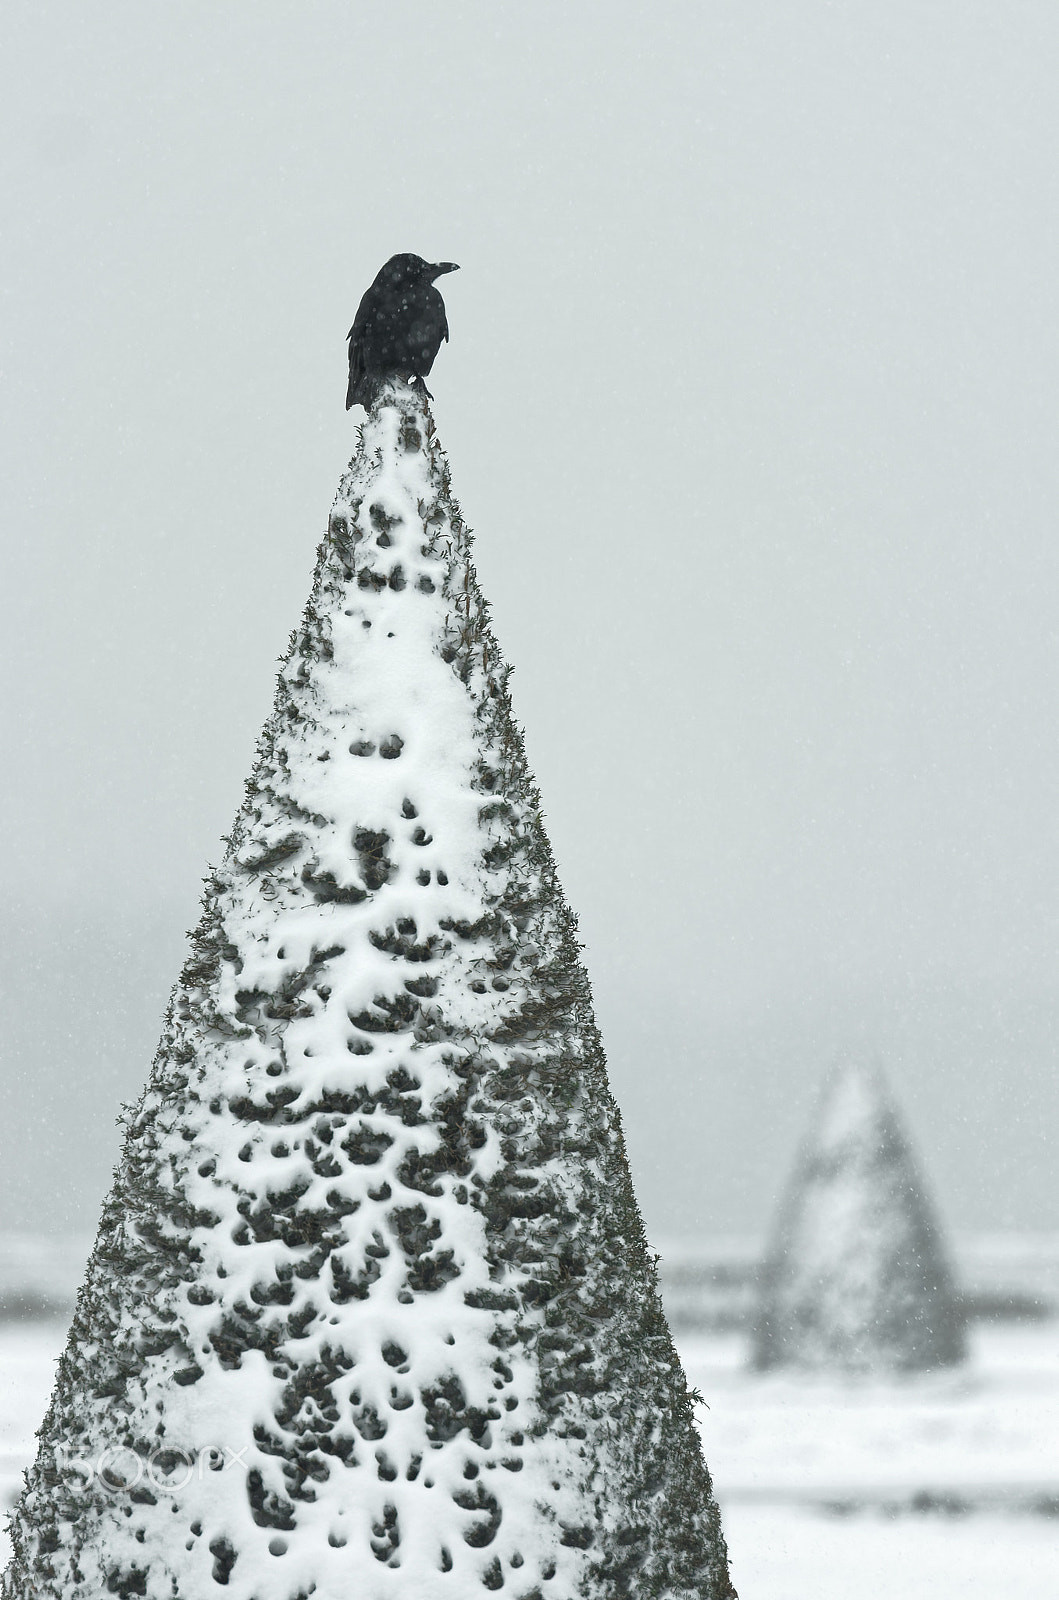 Pentax K-5 II sample photo. The crow and the snow photography